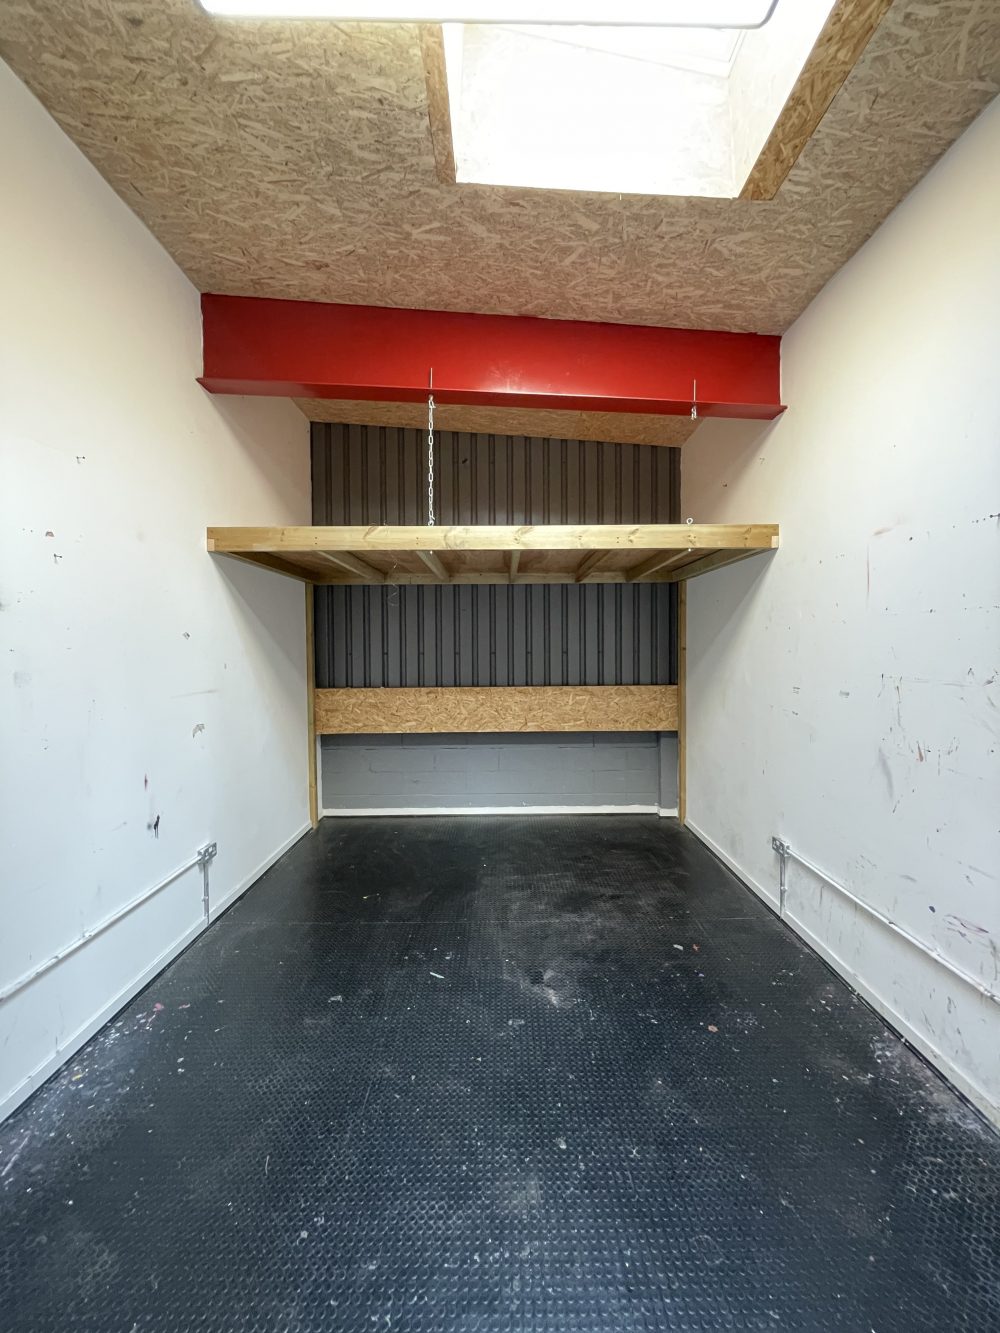 N4 Manor House Eade Road 1st Floor Unit To rent in Creative Warehouse Hub North London27